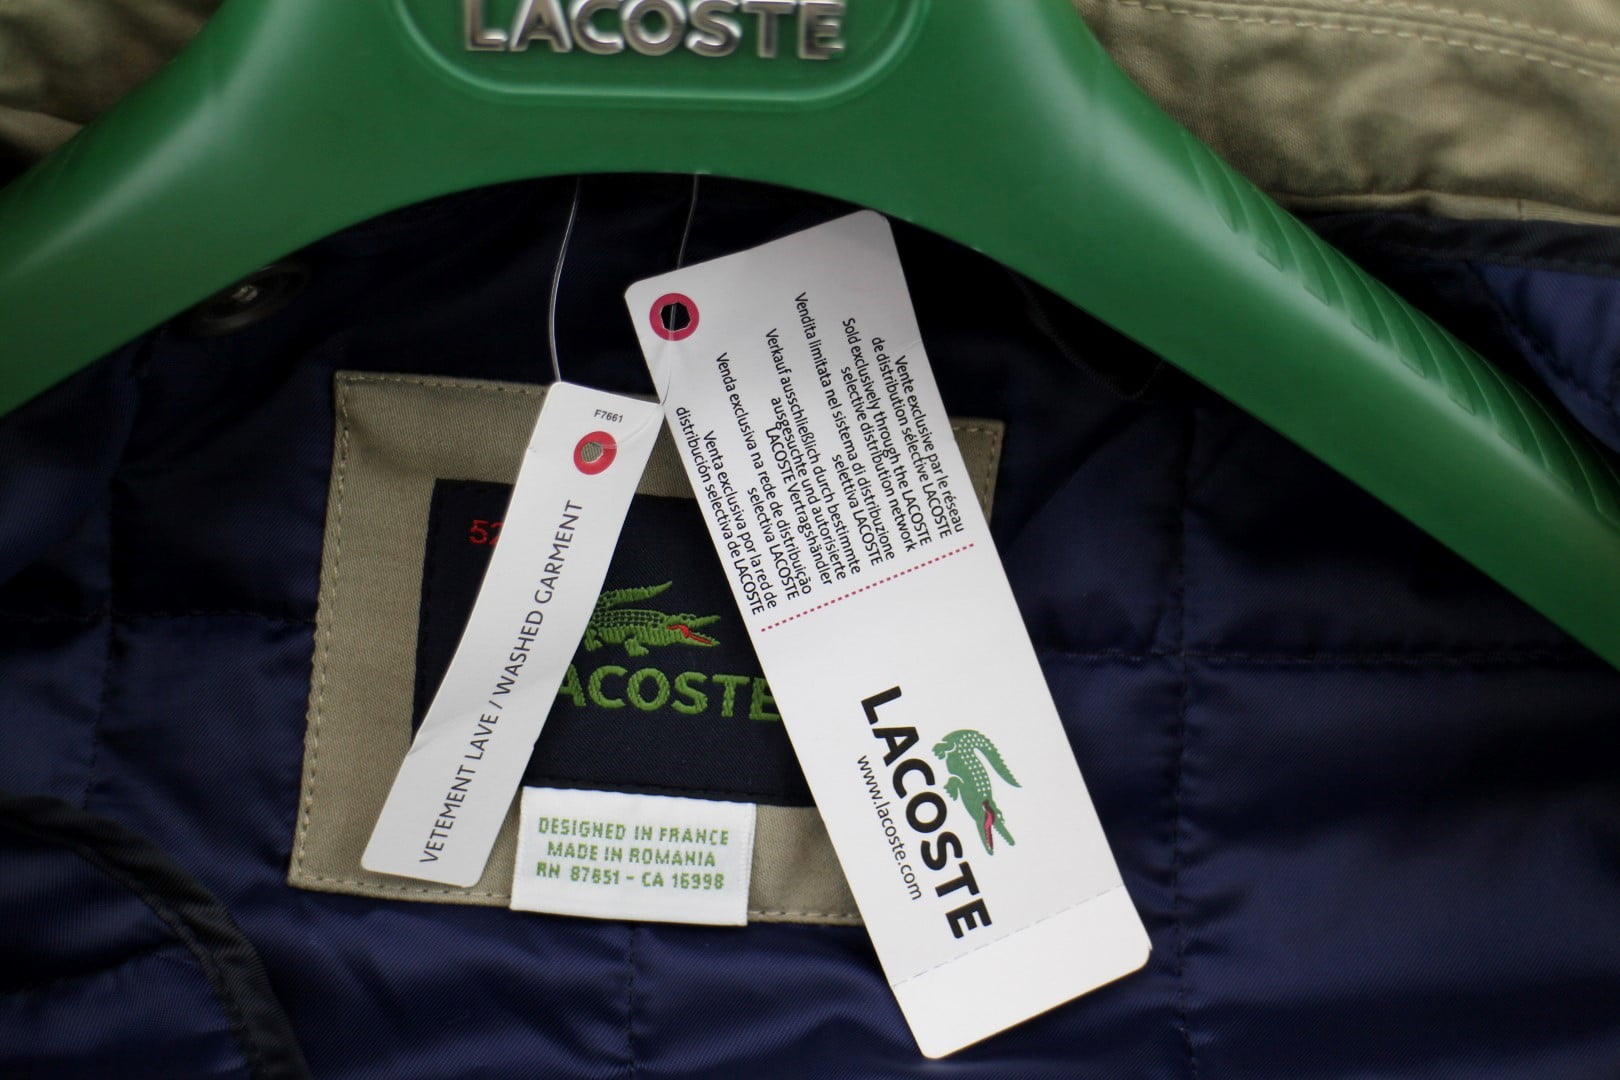 lacoste rn 87651 ca 16998 jacket off 63 